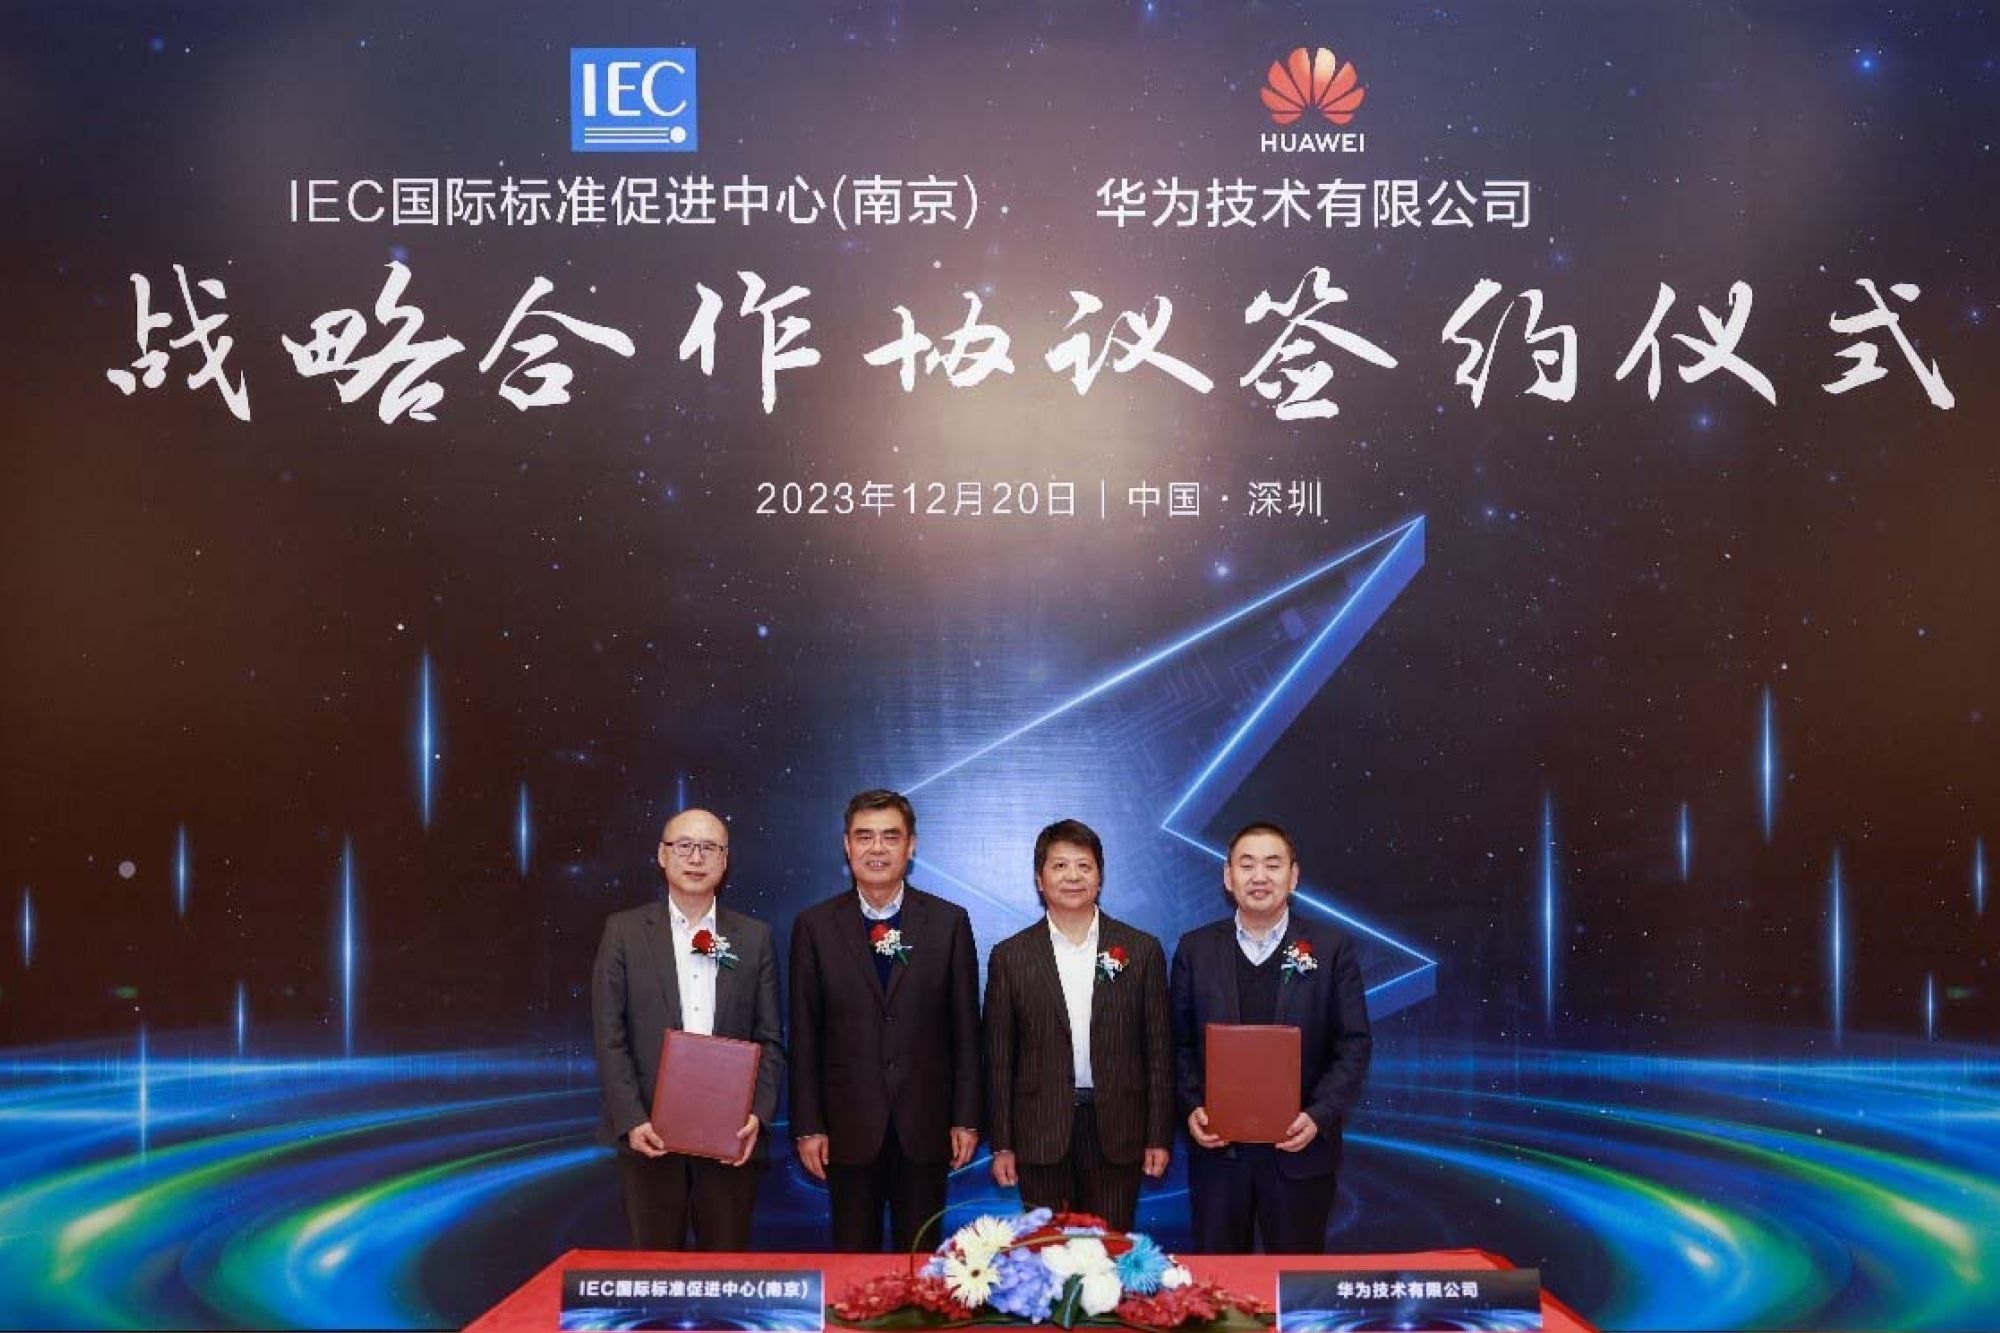 IEC Nanjing and Huawei forge strategic alliance for power digitalisation